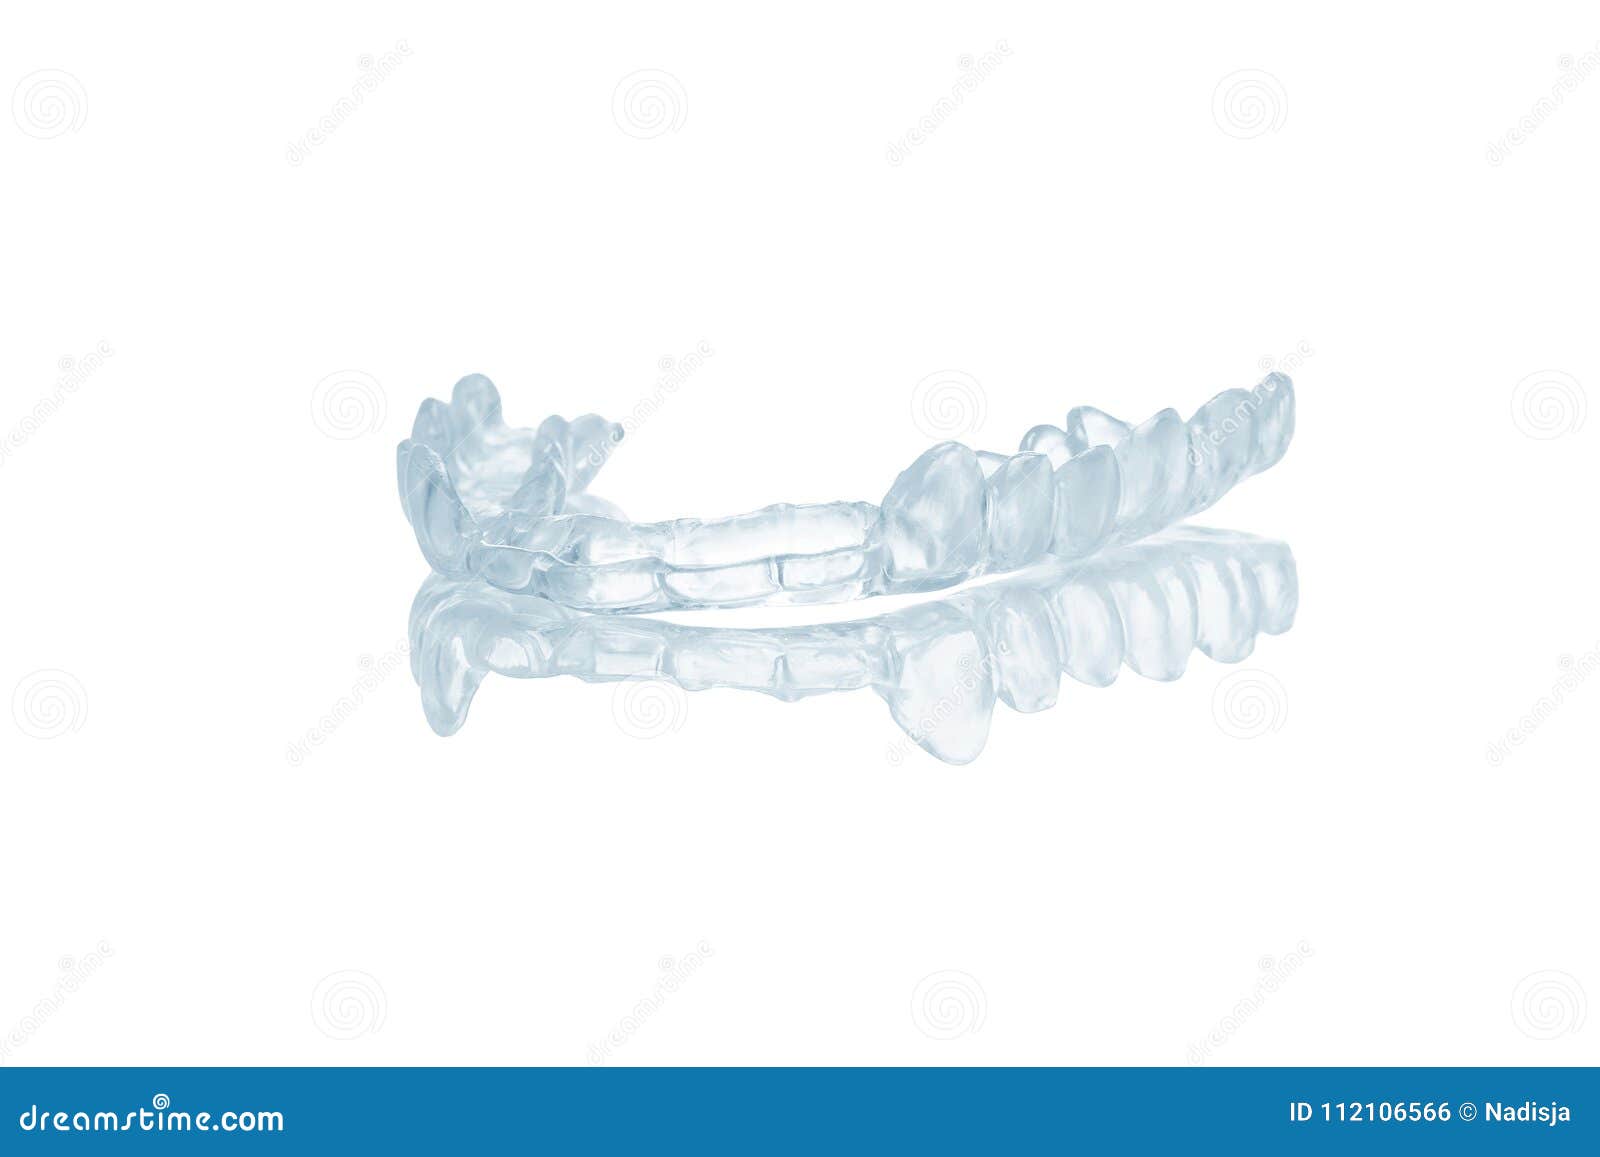 night dental mouth guard  on white